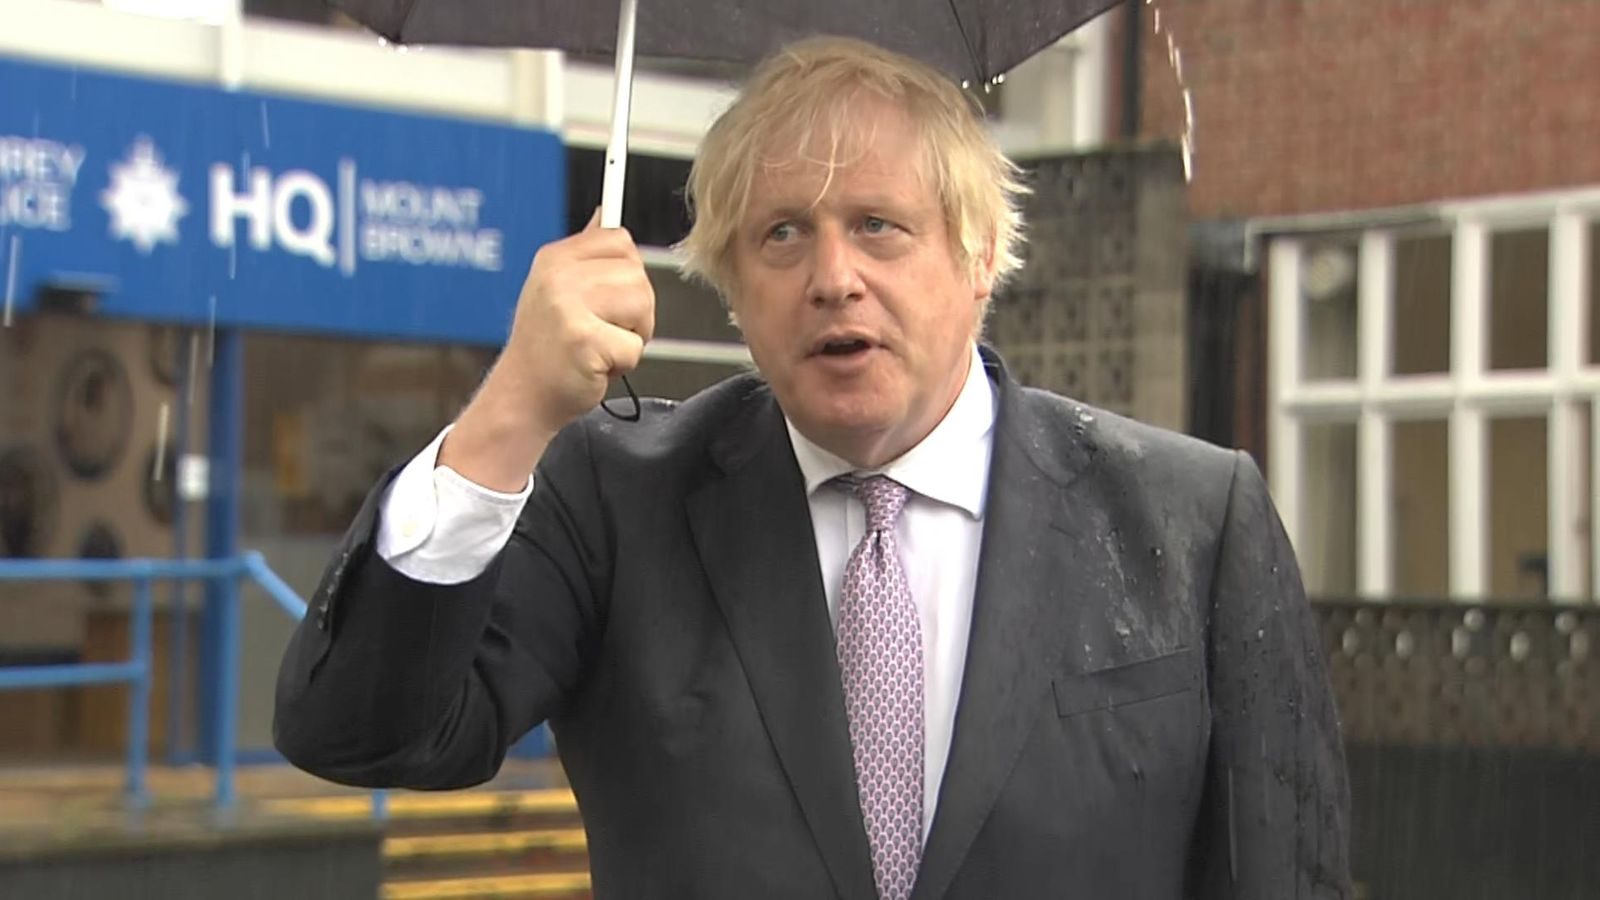 Boris Johnson stressed the need for caution despite recent falls in the number of cases. Photo: SkyNews 